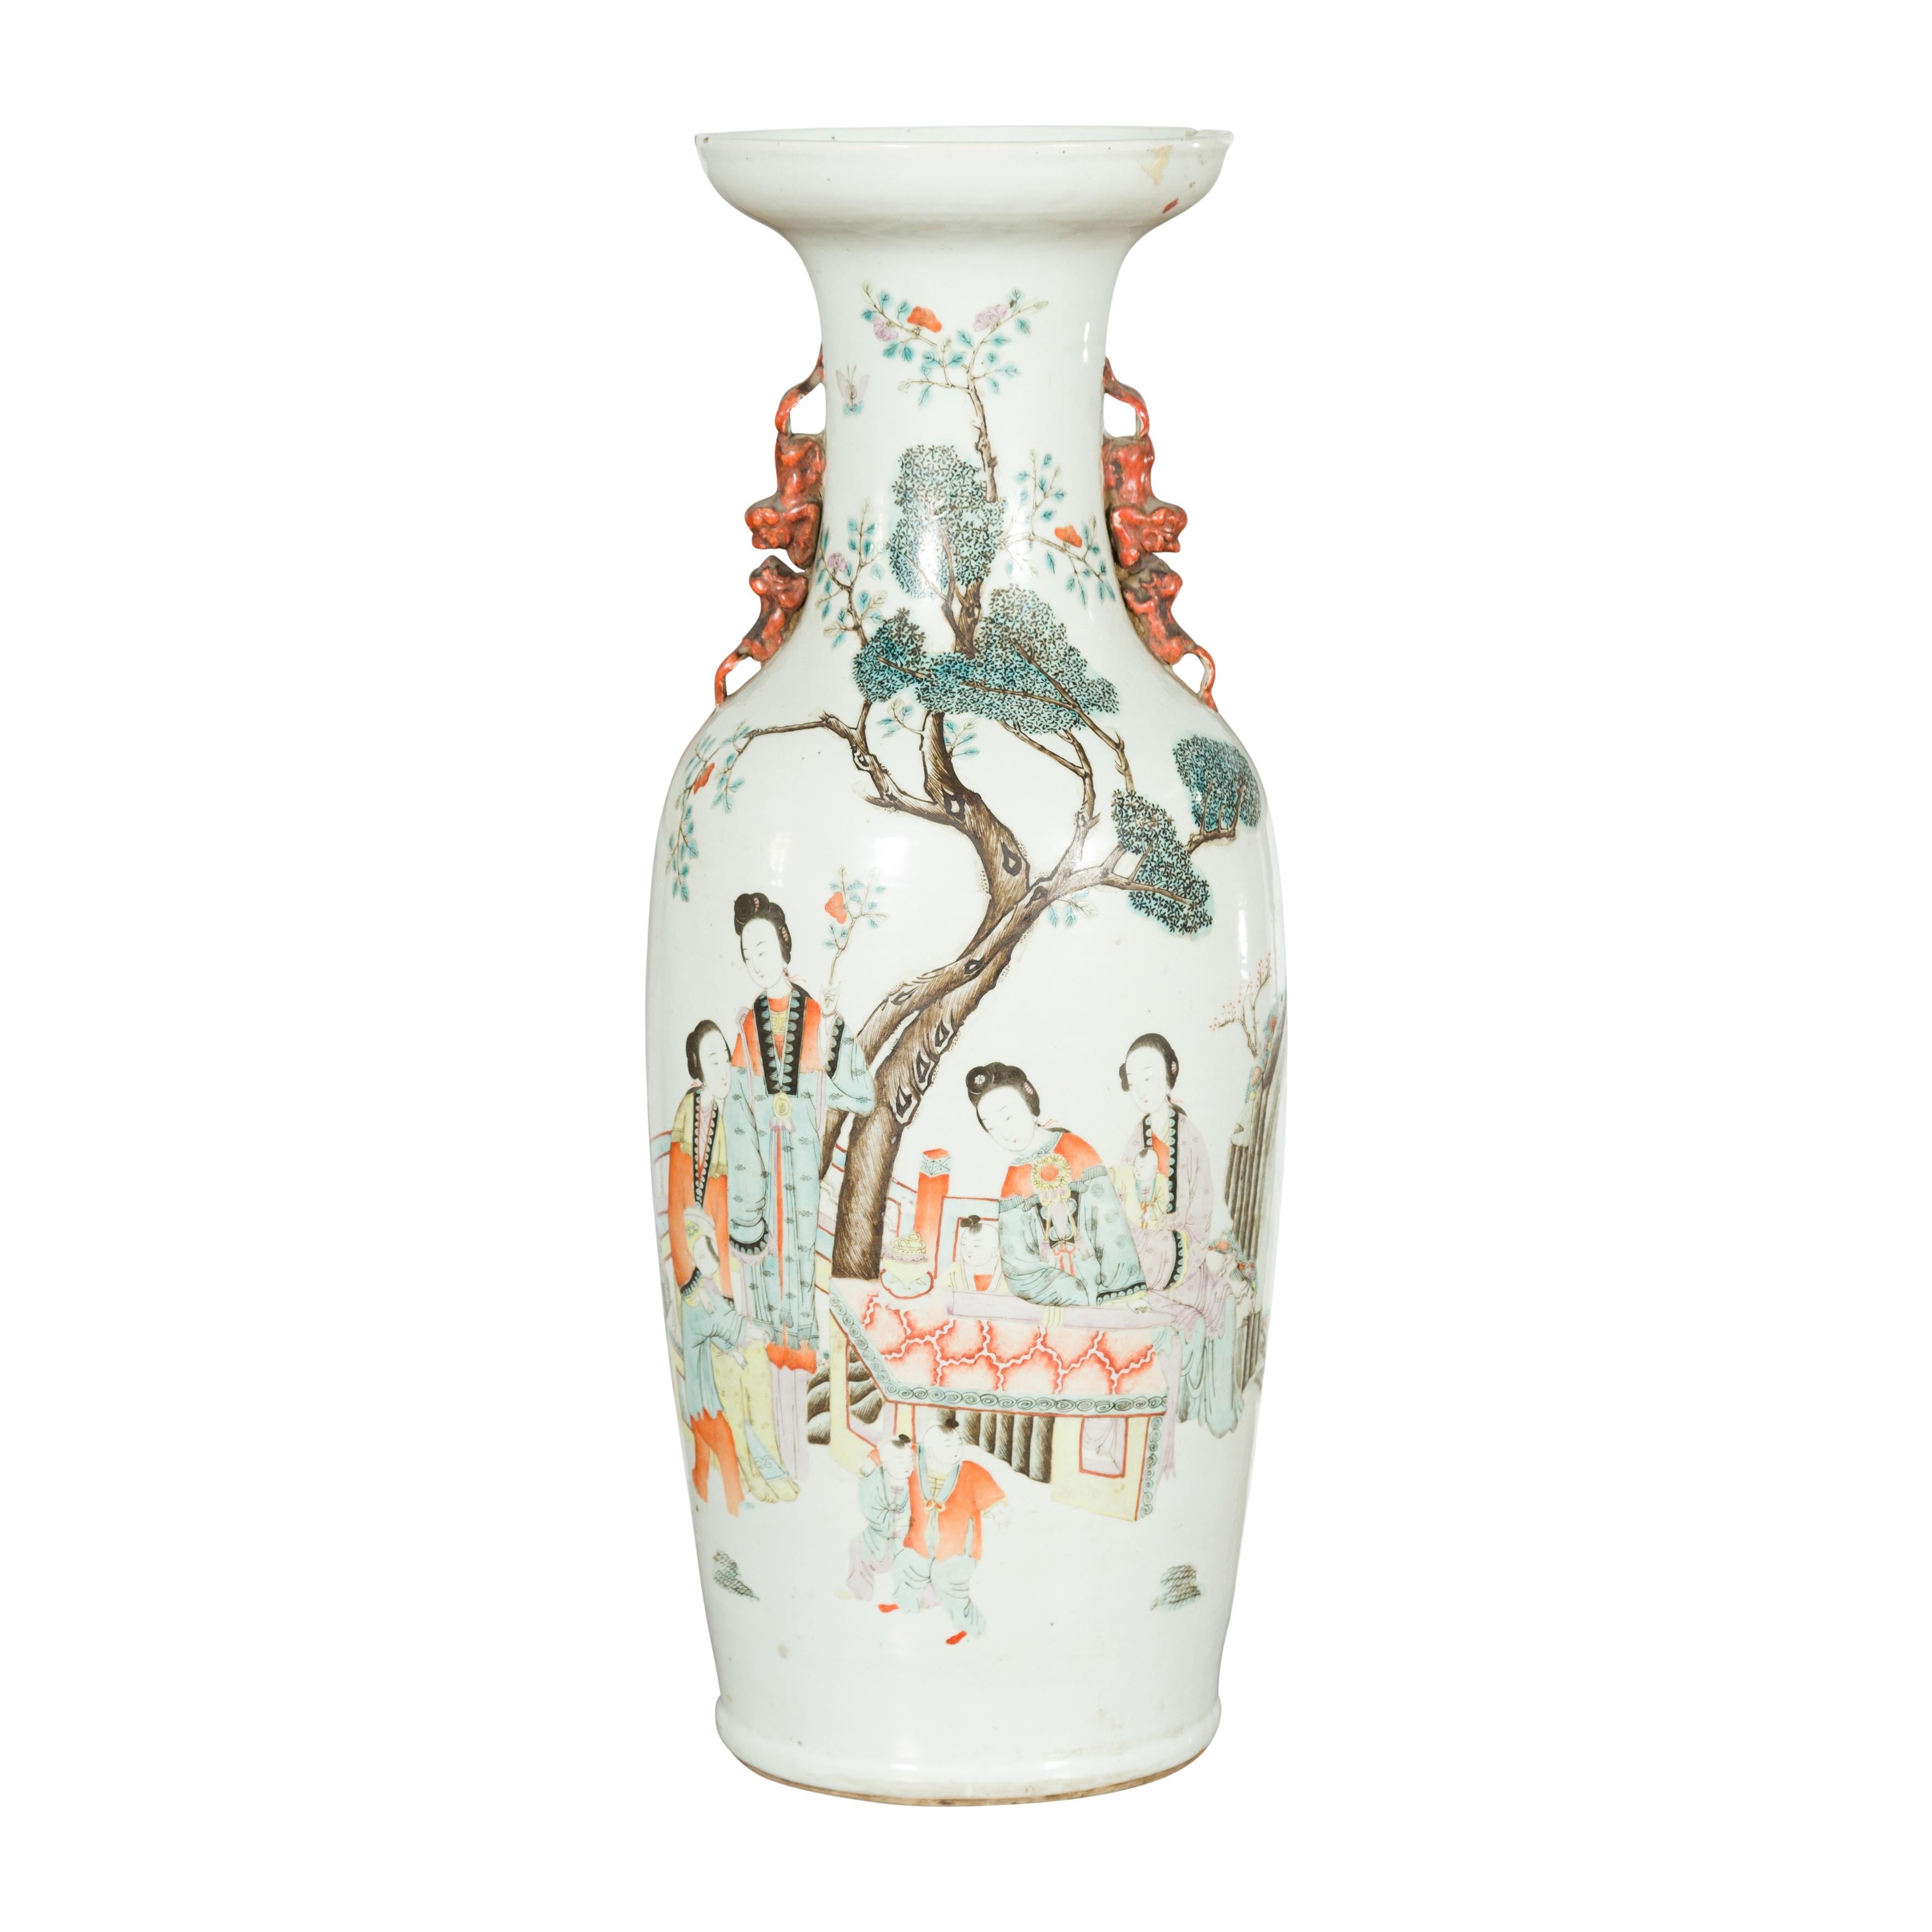 Chinese Qing Porcelain Vase with Hand-Painted Figures and Calligraphy Motifs For Sale 11